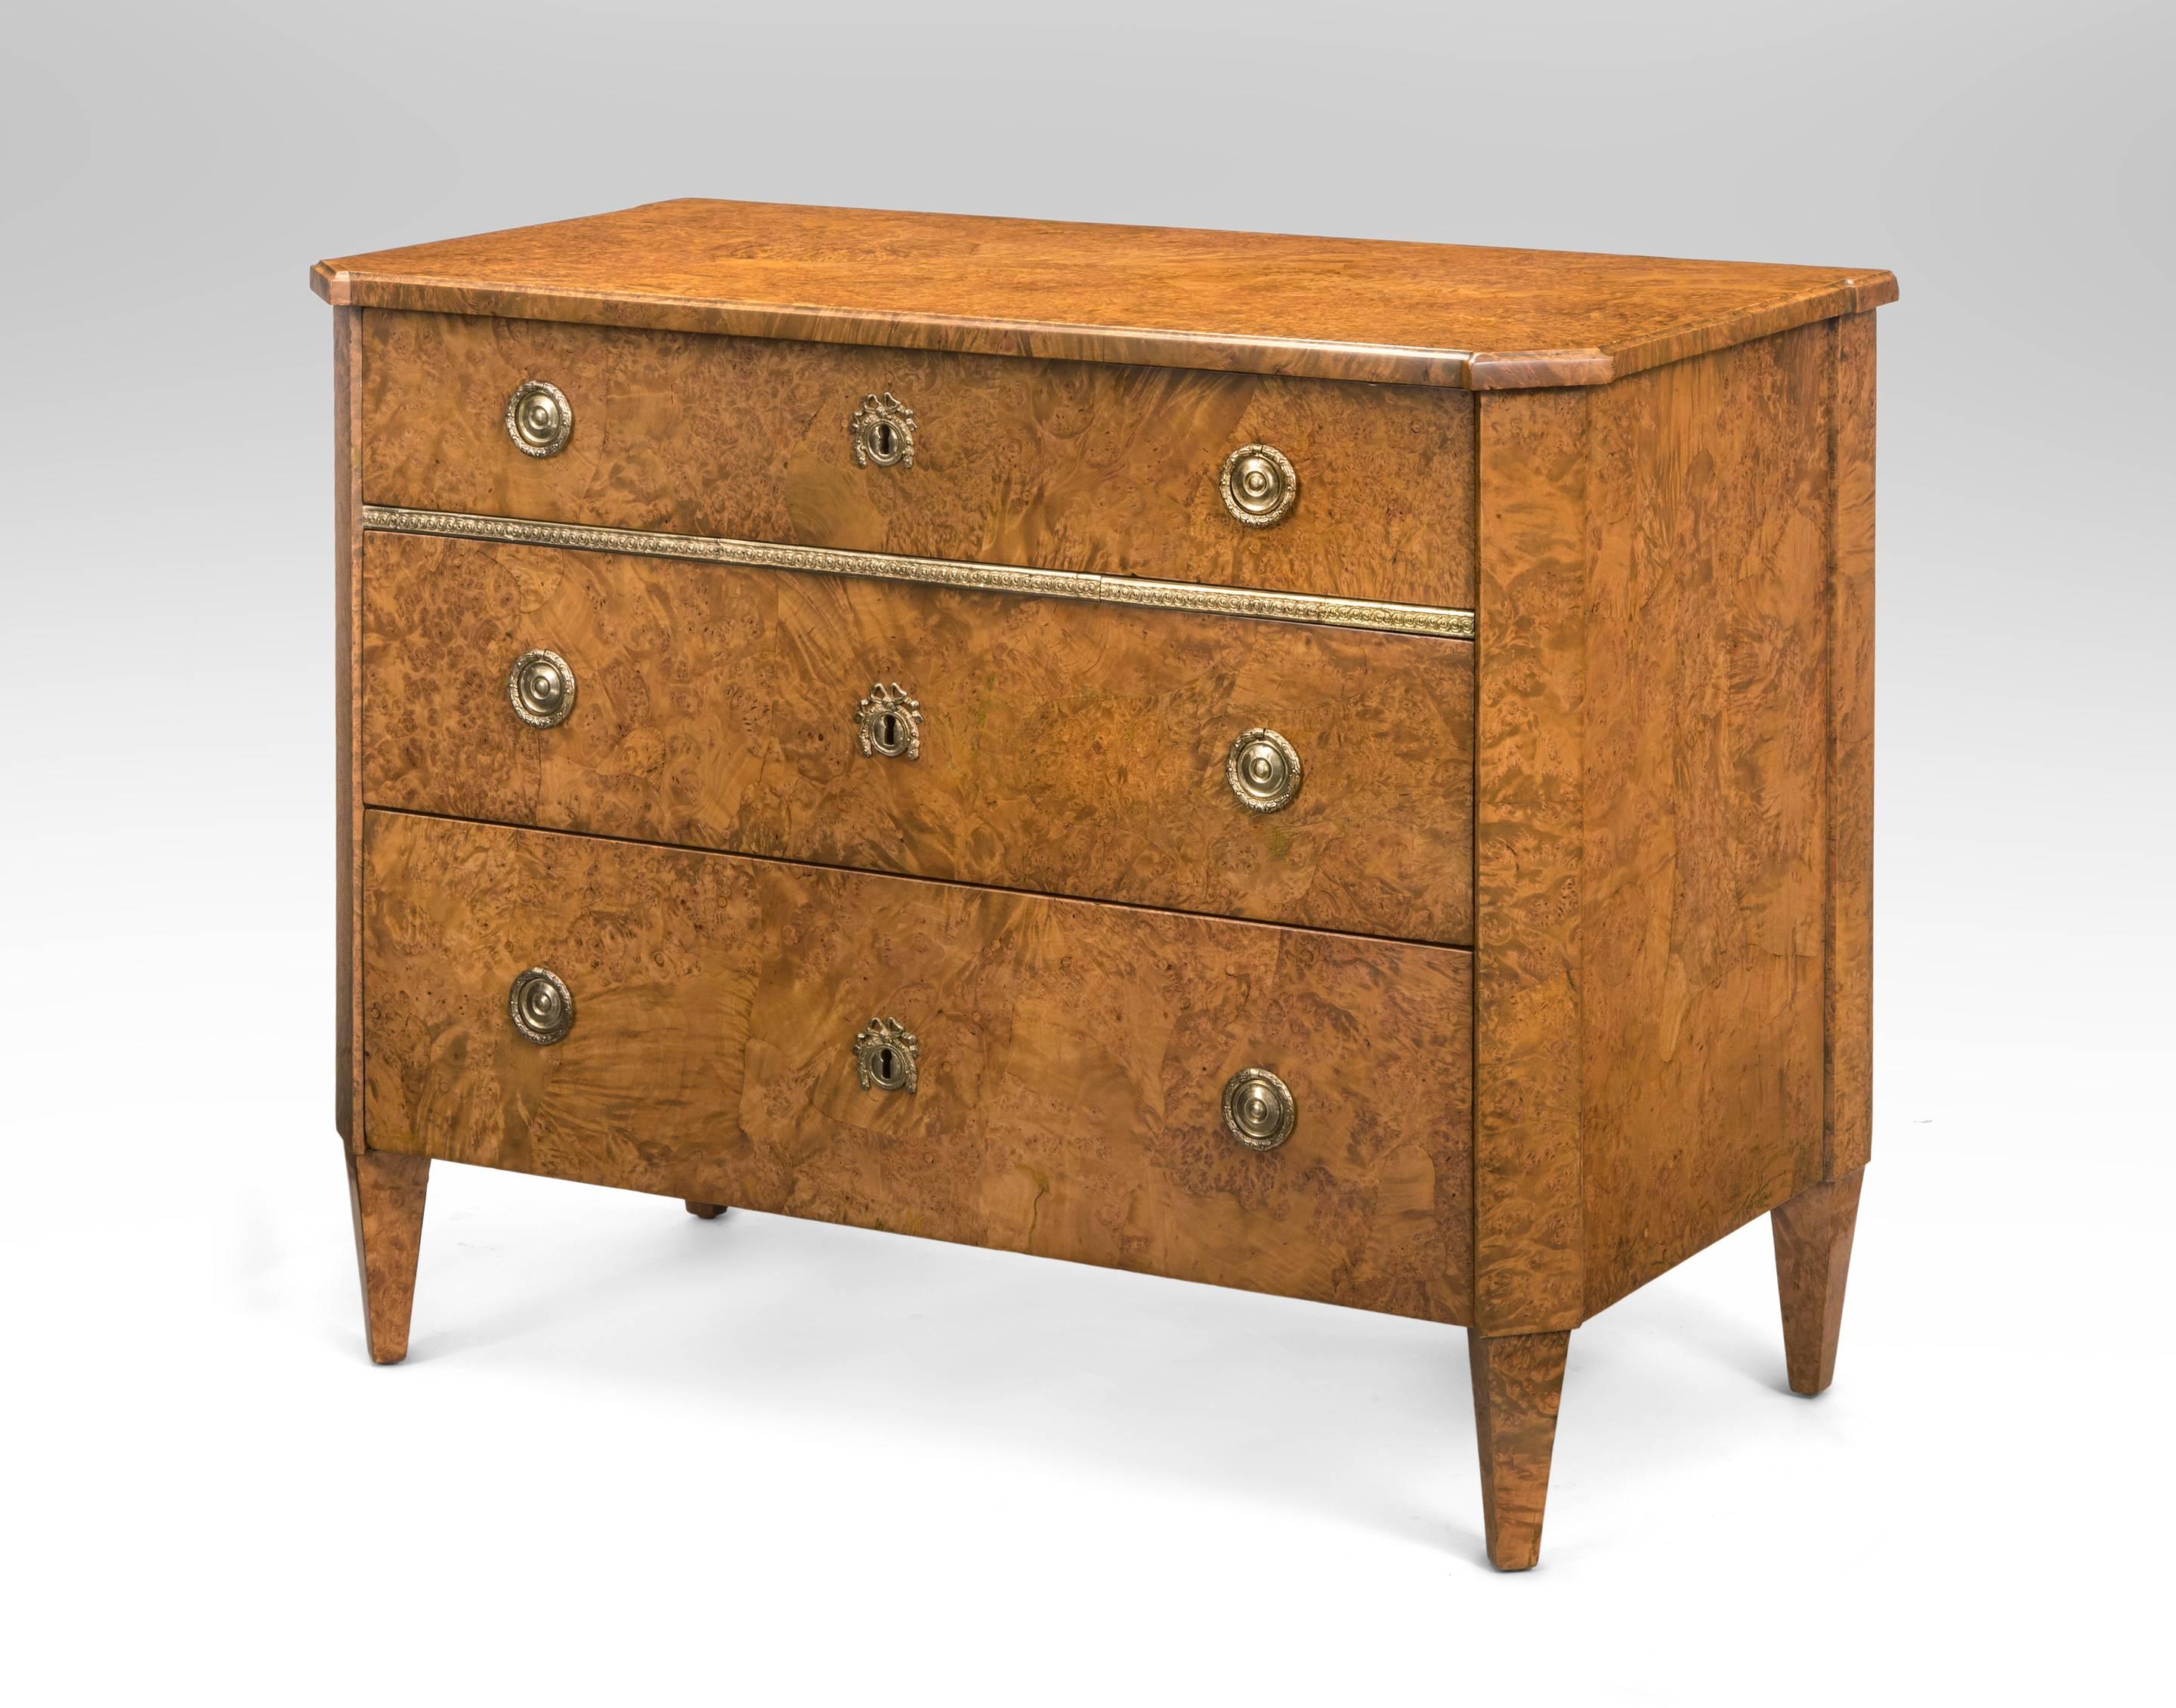 A hard to find Neoclassical commode of beautiful golden colored burlwood. Perfect for a contemporary or eclectic interior. The molded rectangular top with canted corners and break-front sides above one frieze drawer and two lower drawers graduating